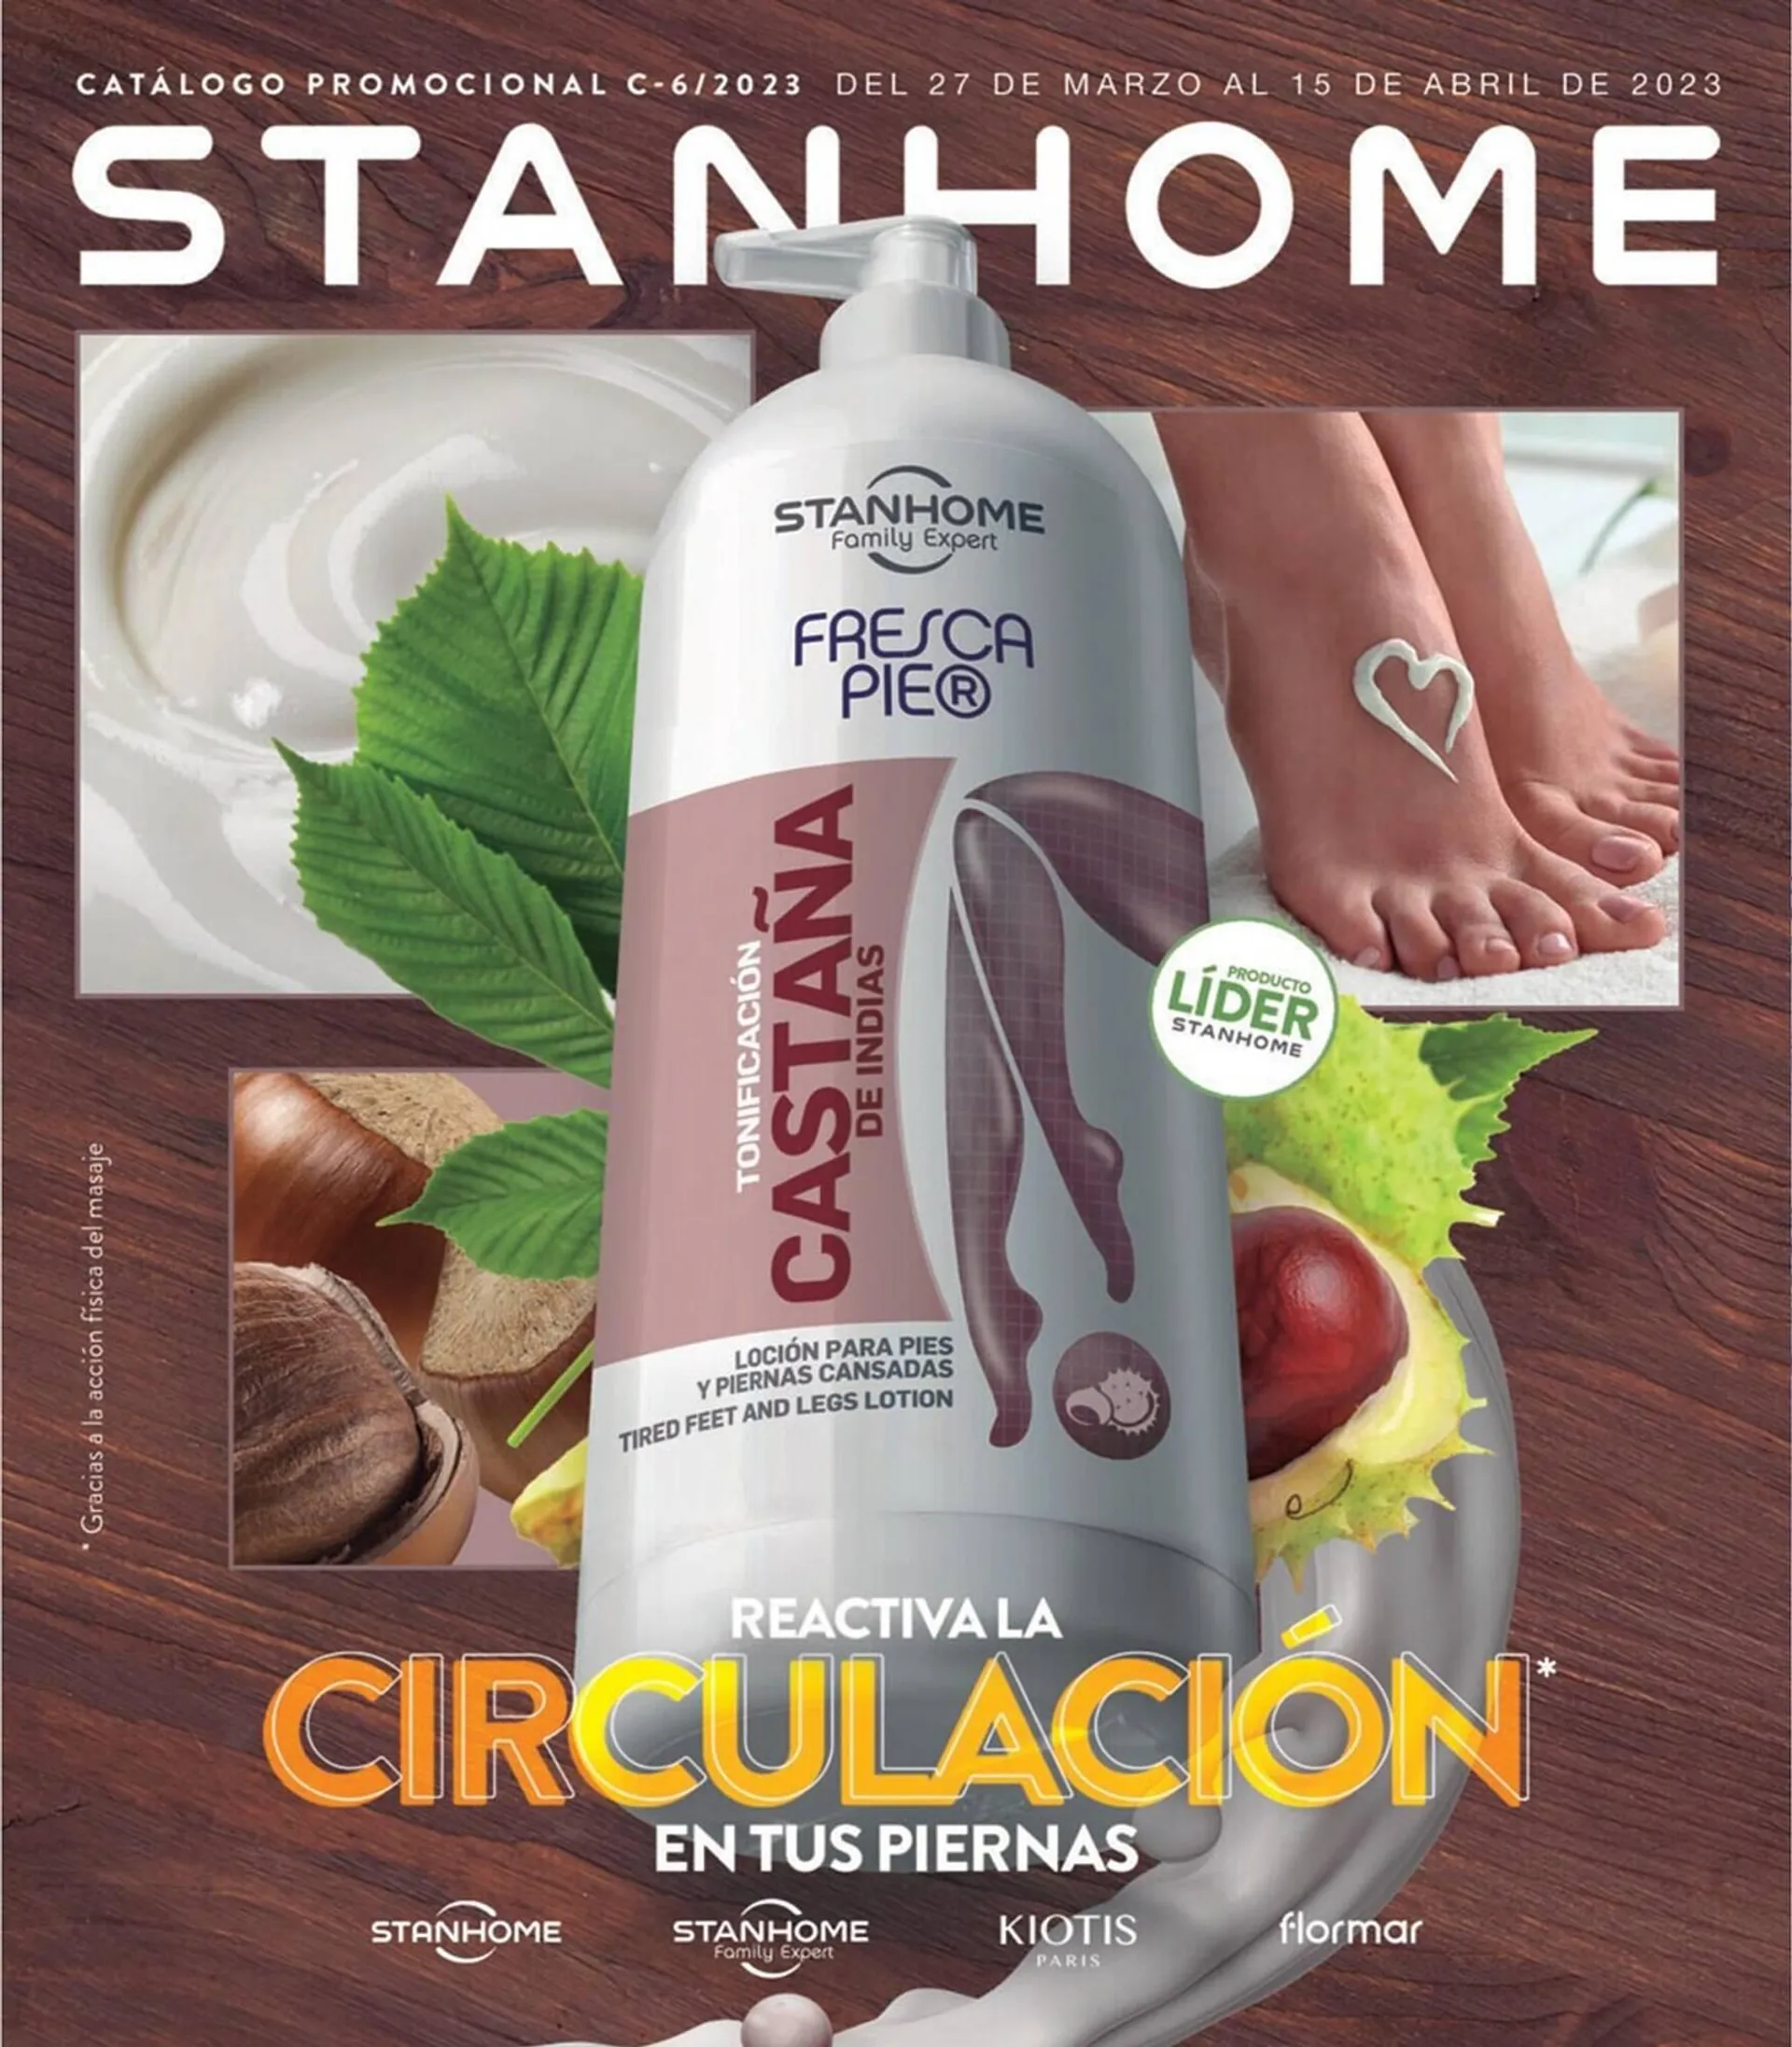 Productos Stanhome